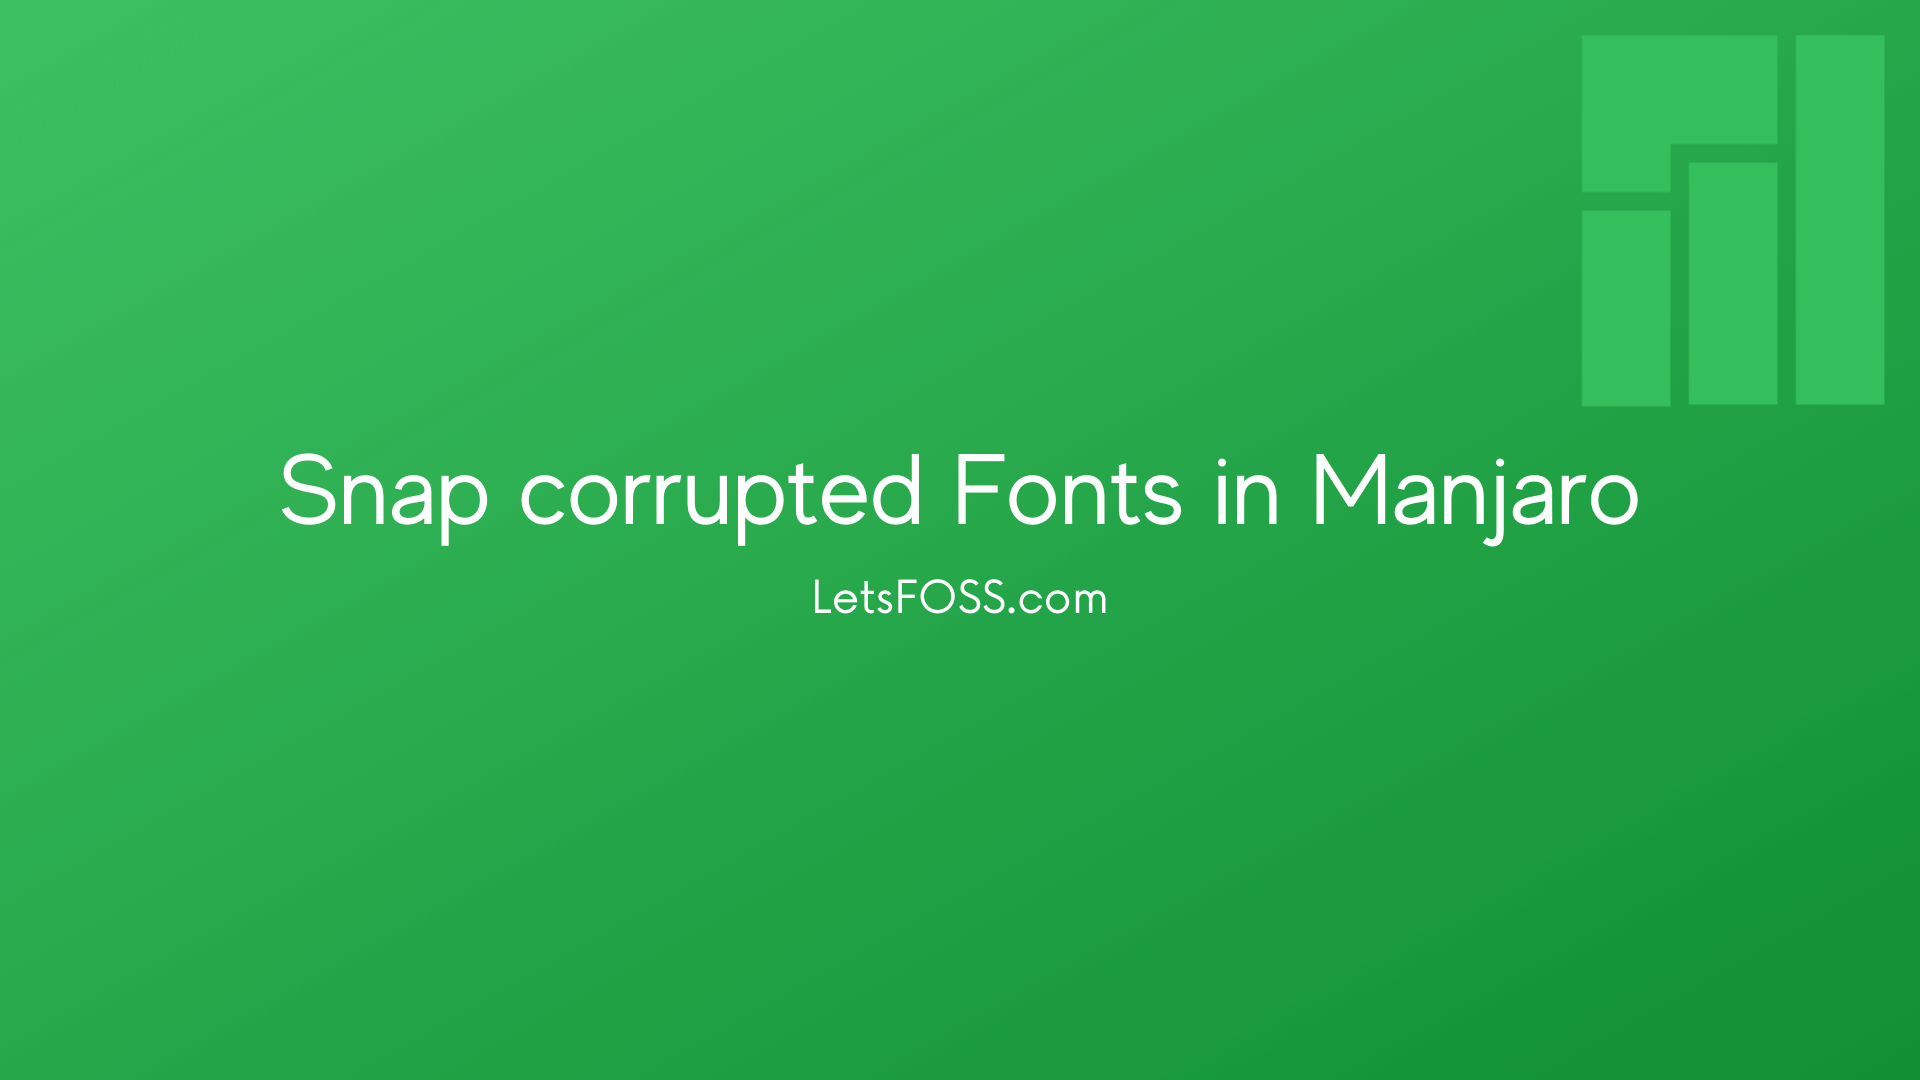 Fix: Snap corrupted Fonts in Manjaro